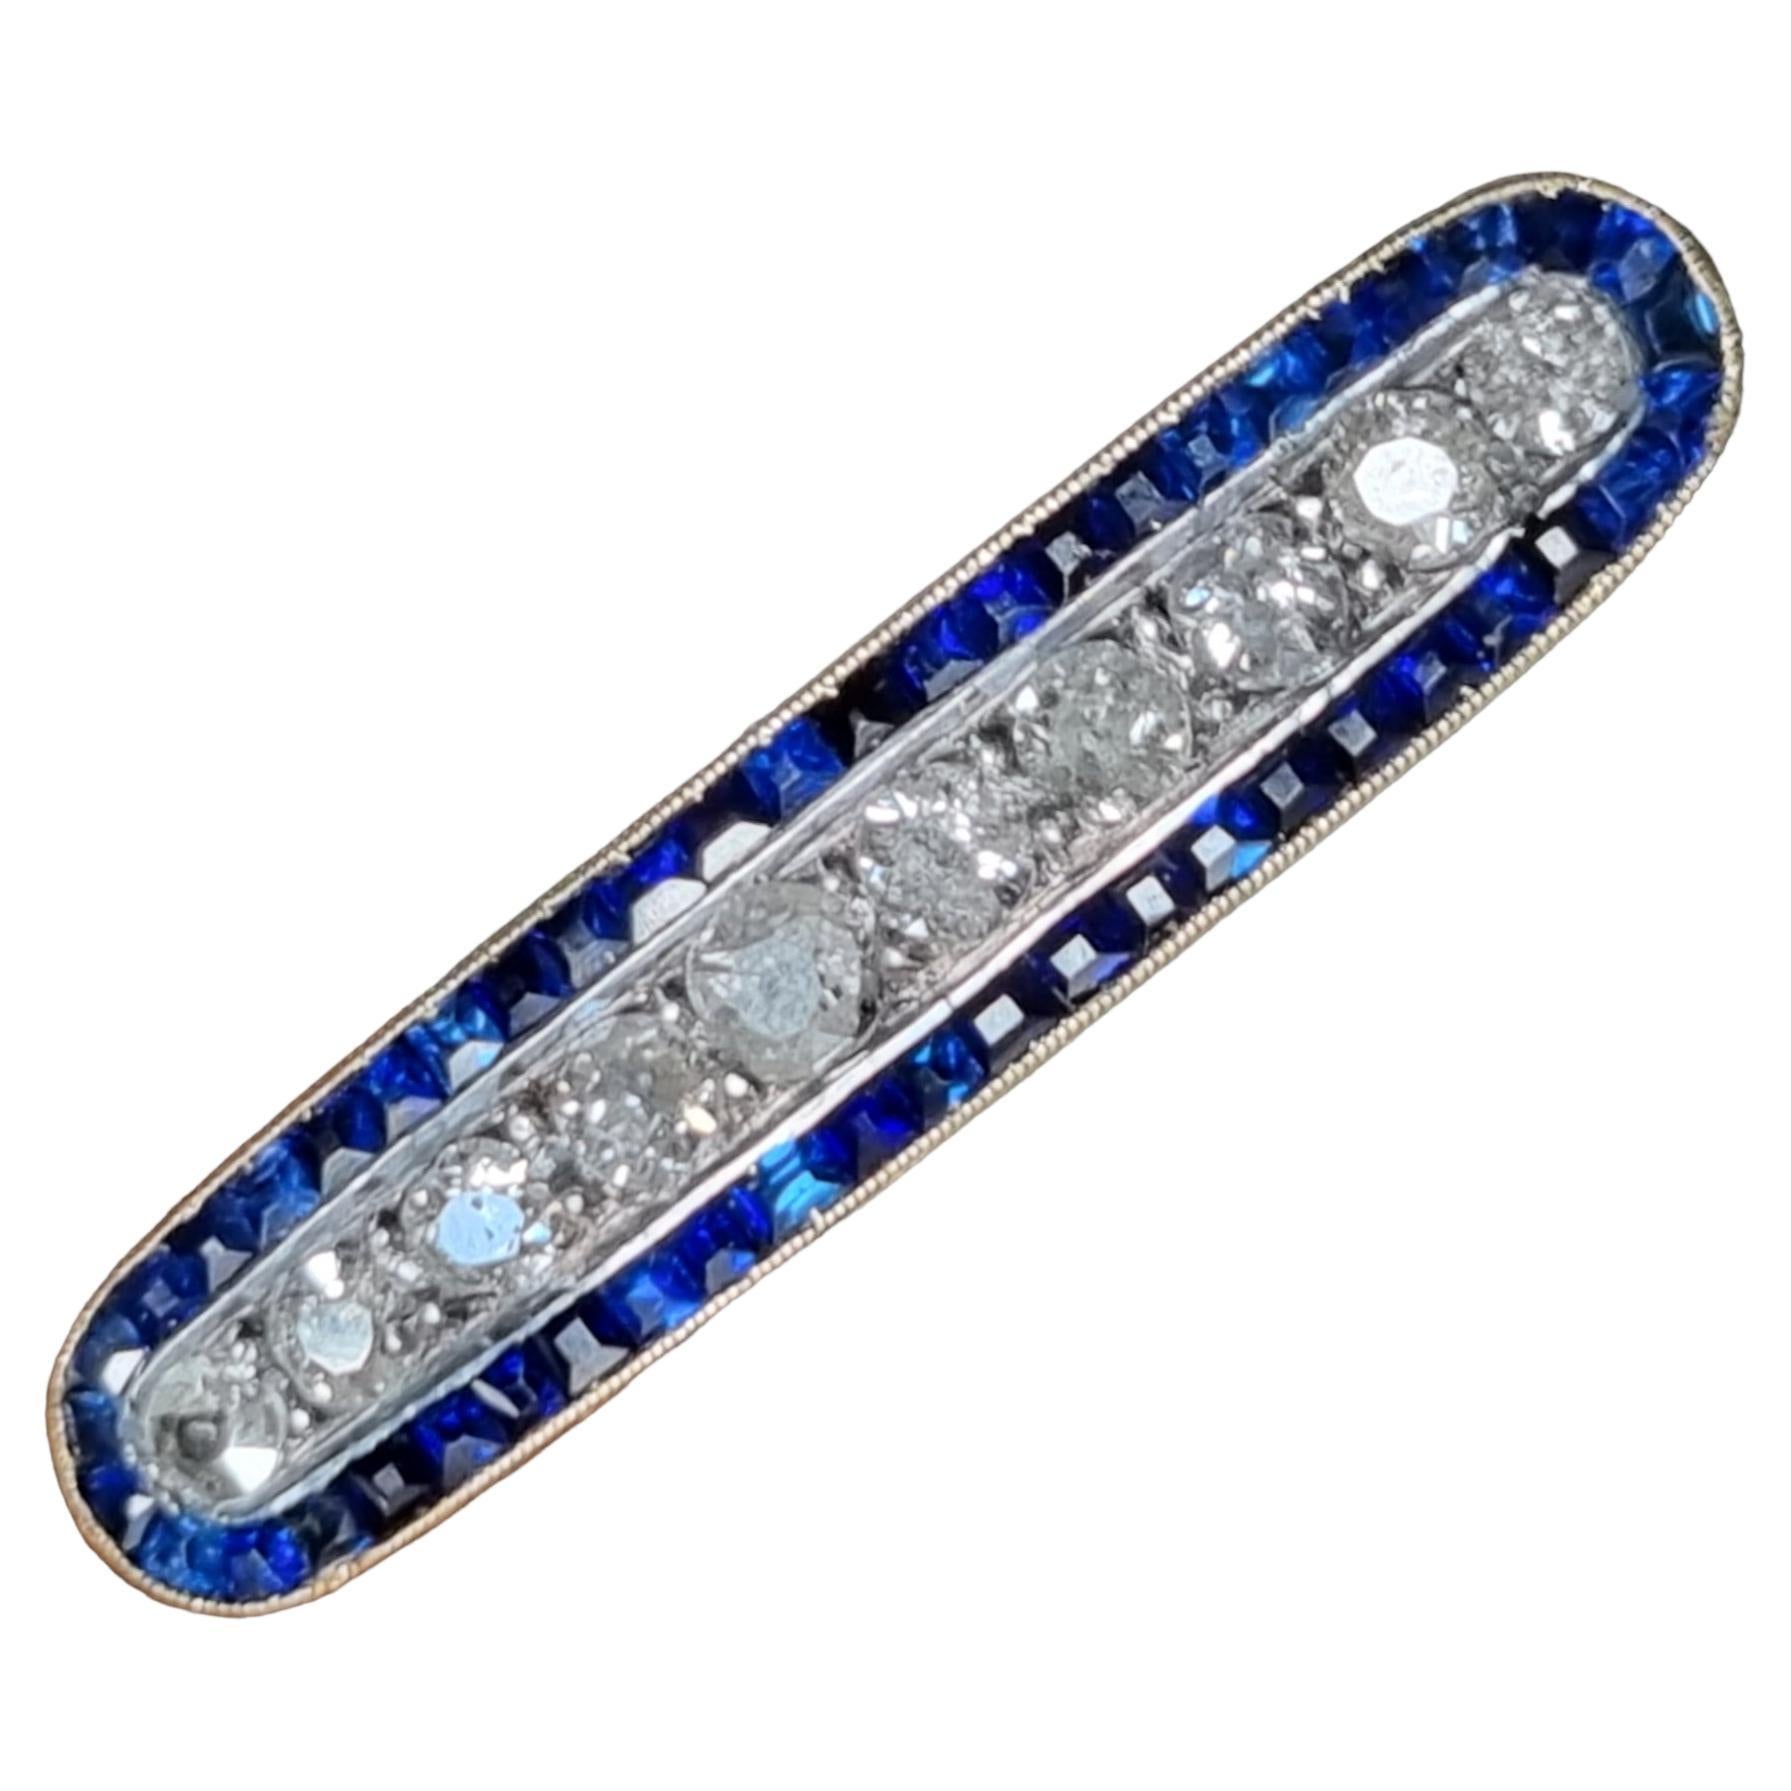 Antique Art Deco Old Cut Diamond and Blue Sapphire Bar Brooch 'Early 20th C'